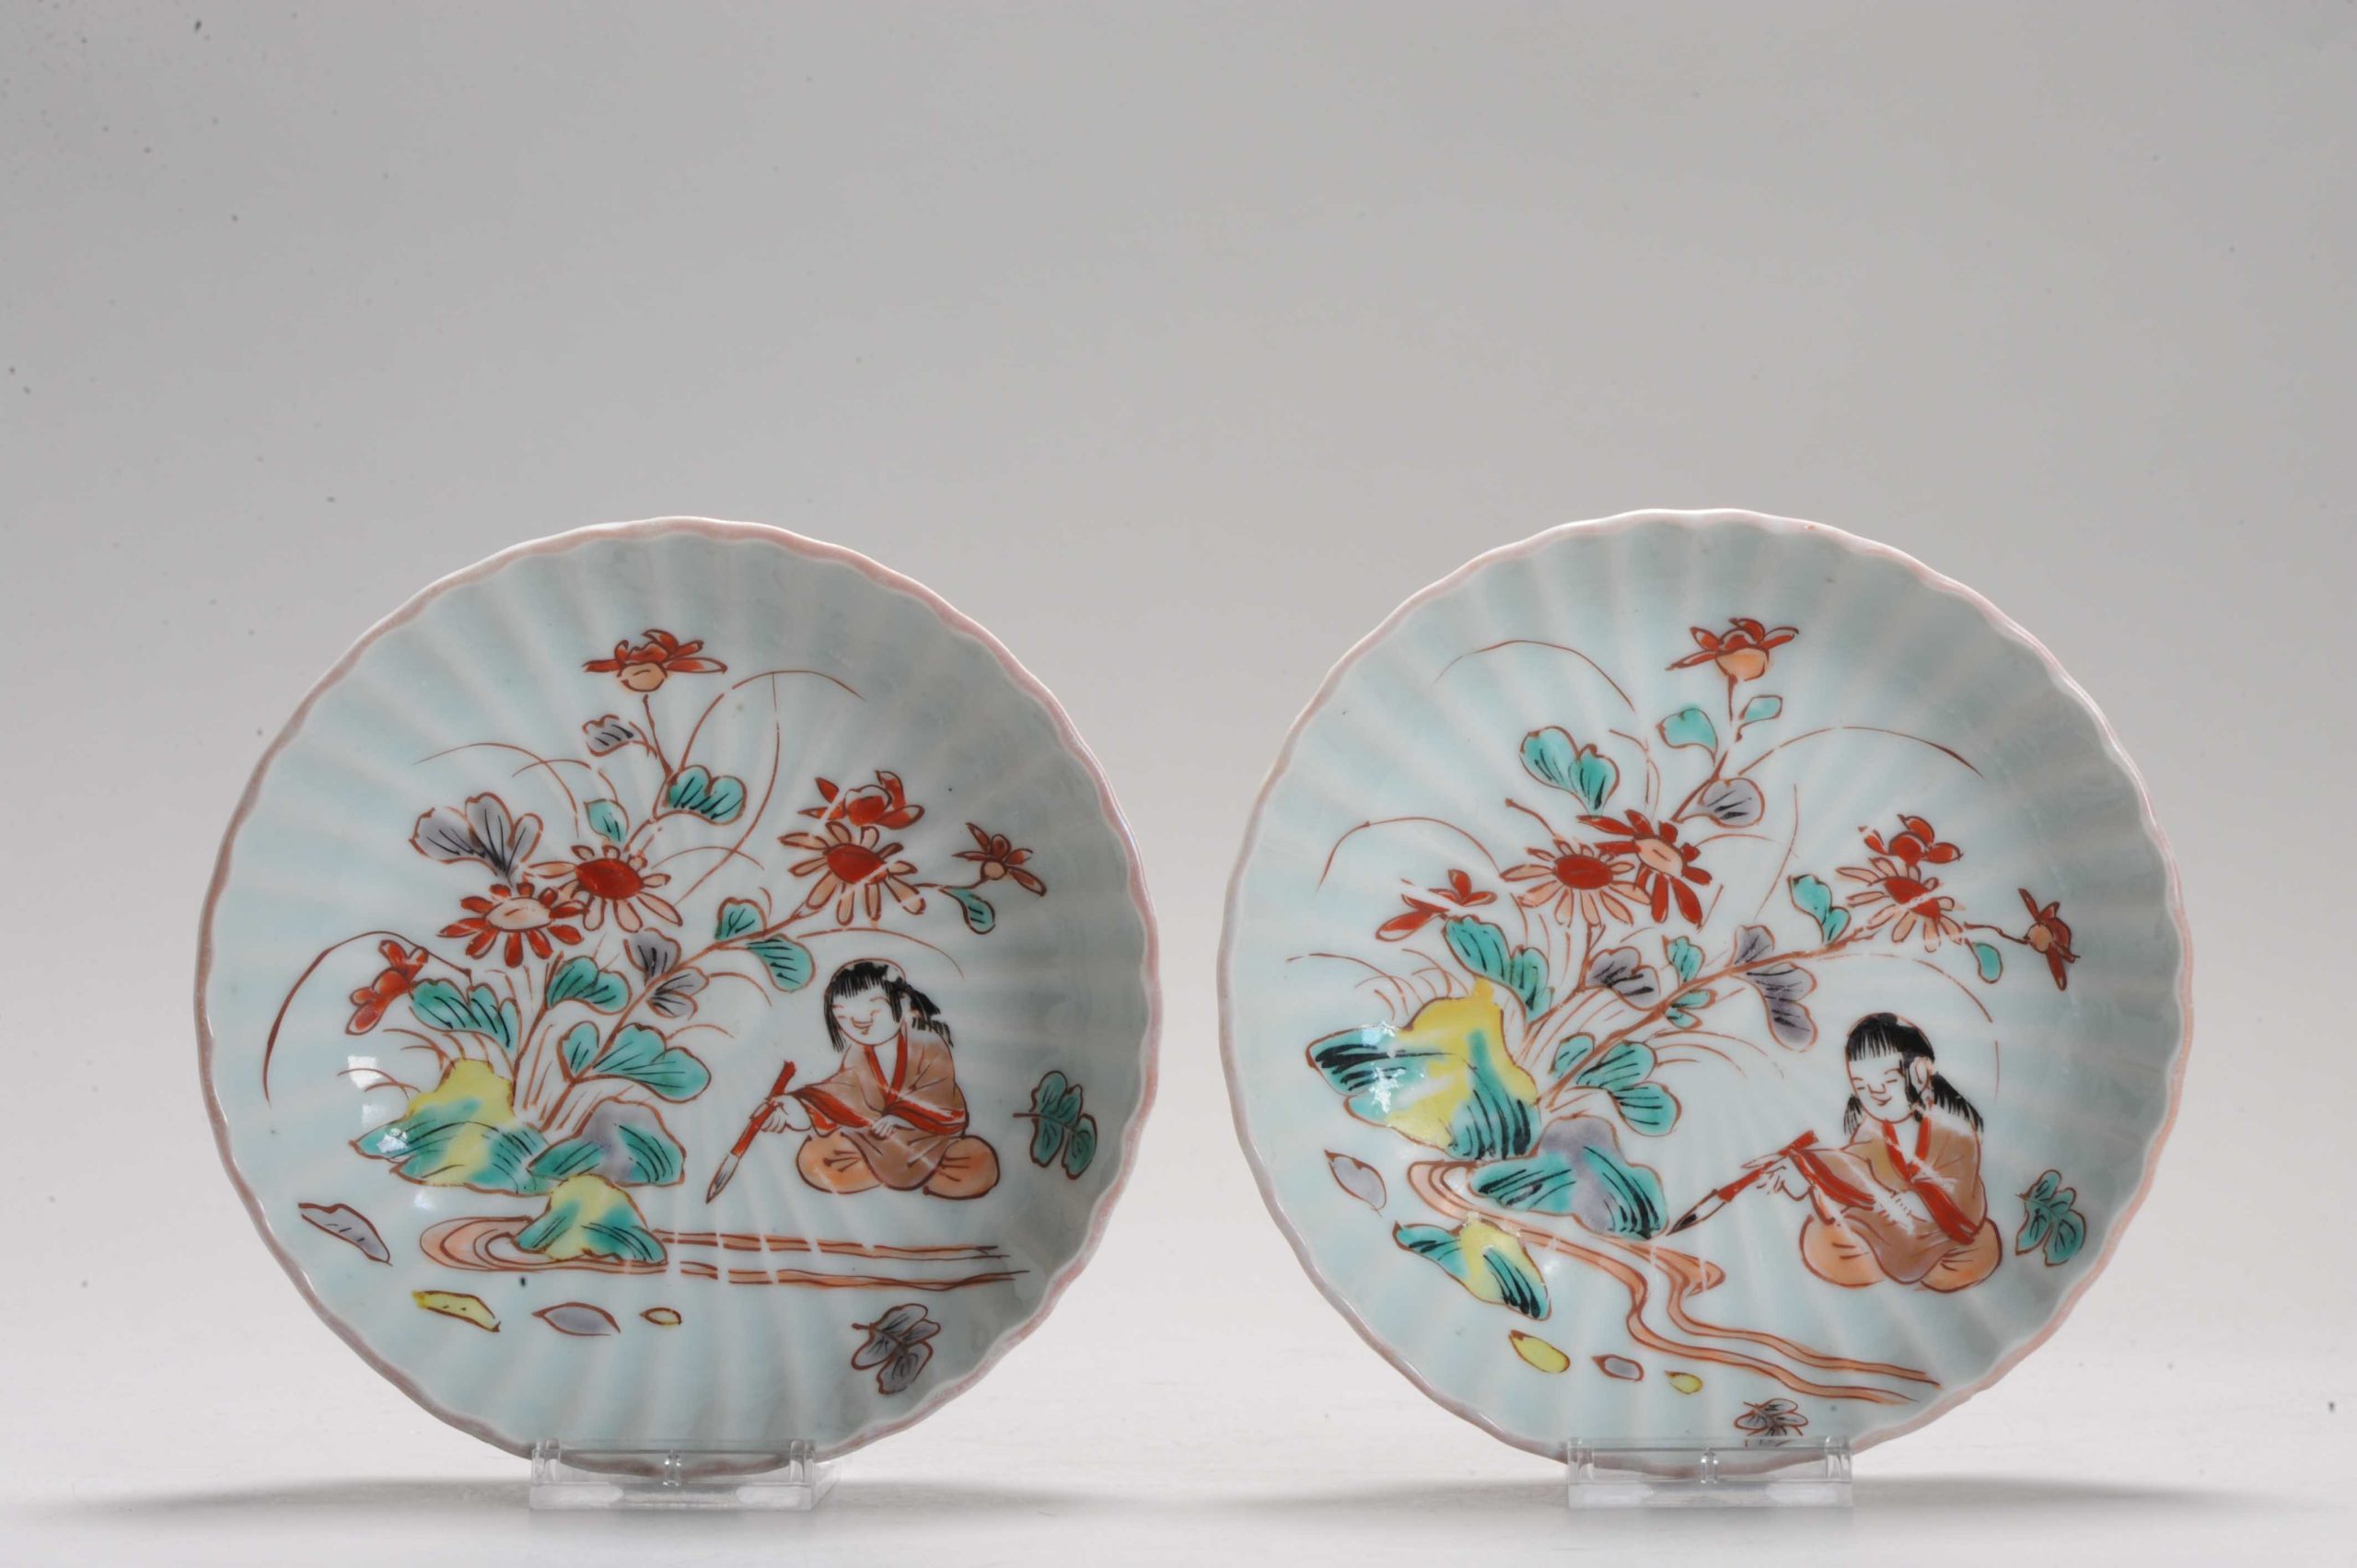 1176 & 1177 A Japanese porcelain Colored dish with figure painting a river